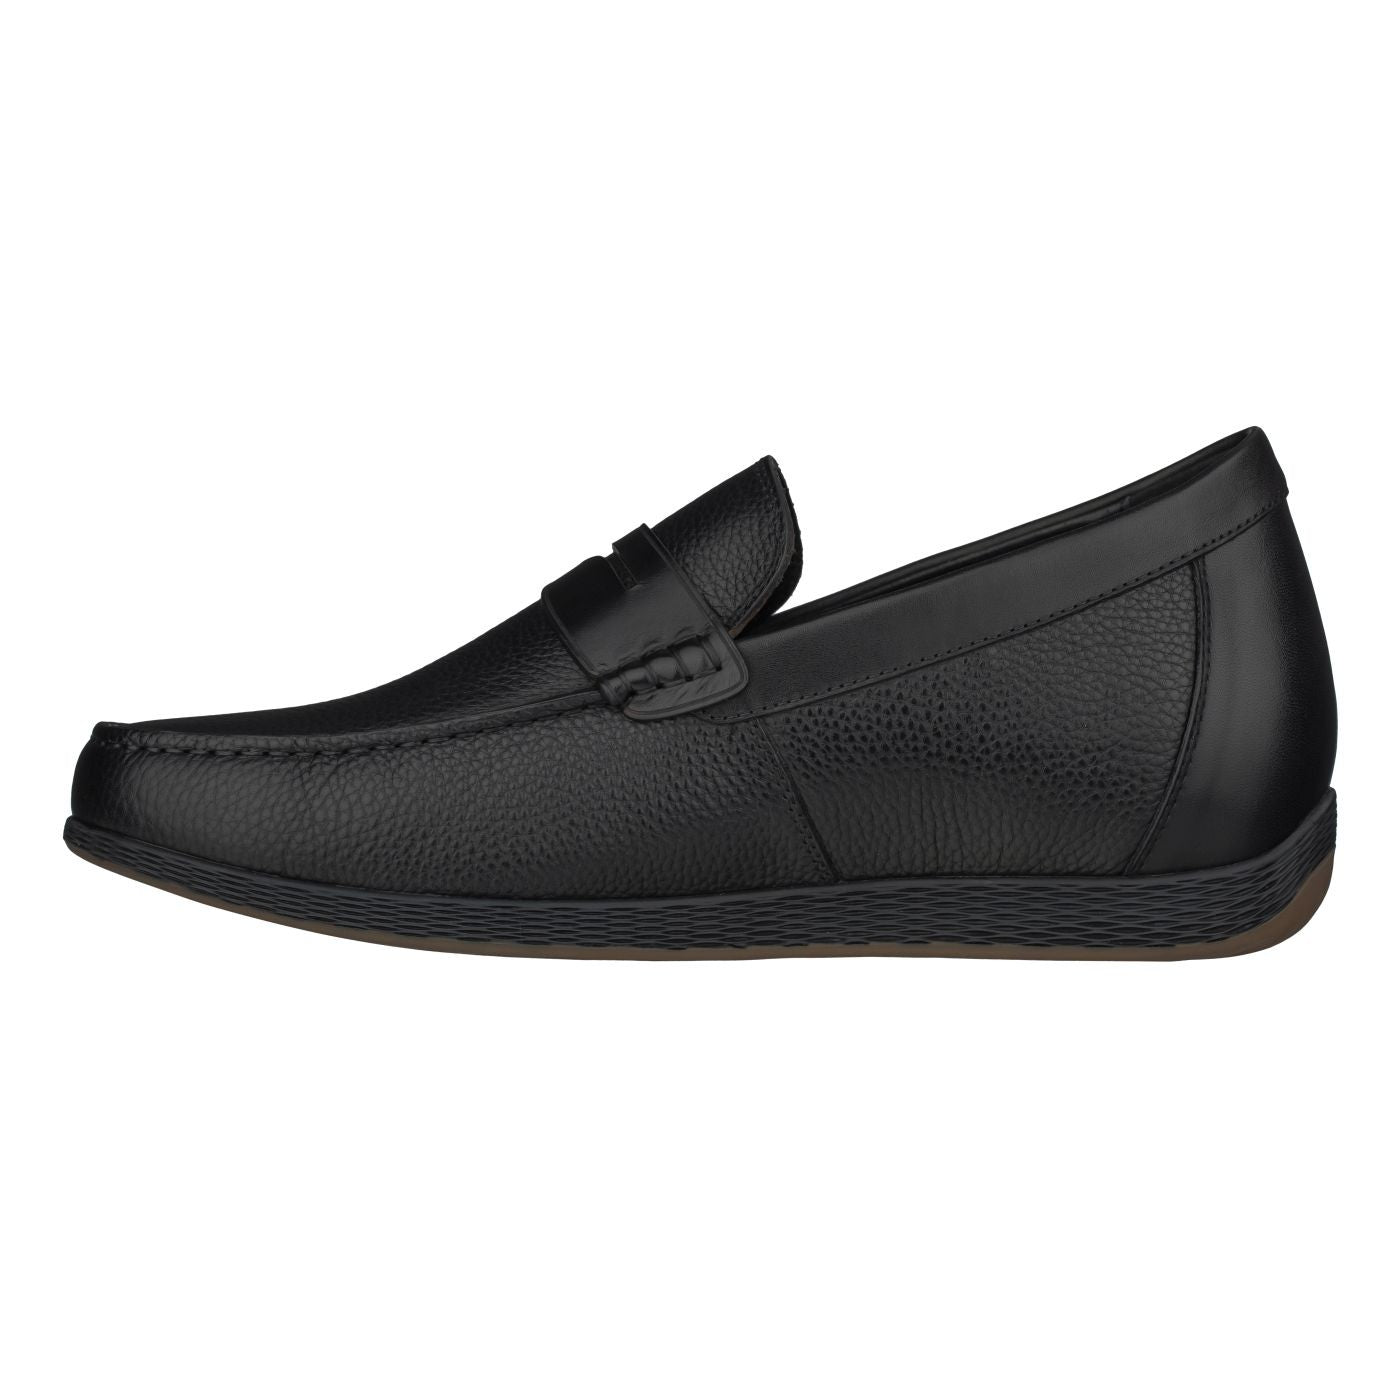 Elevator shoes height increase CALTO Black Penny Loafer Elevator Shoes - 2.4 Inches - S1090